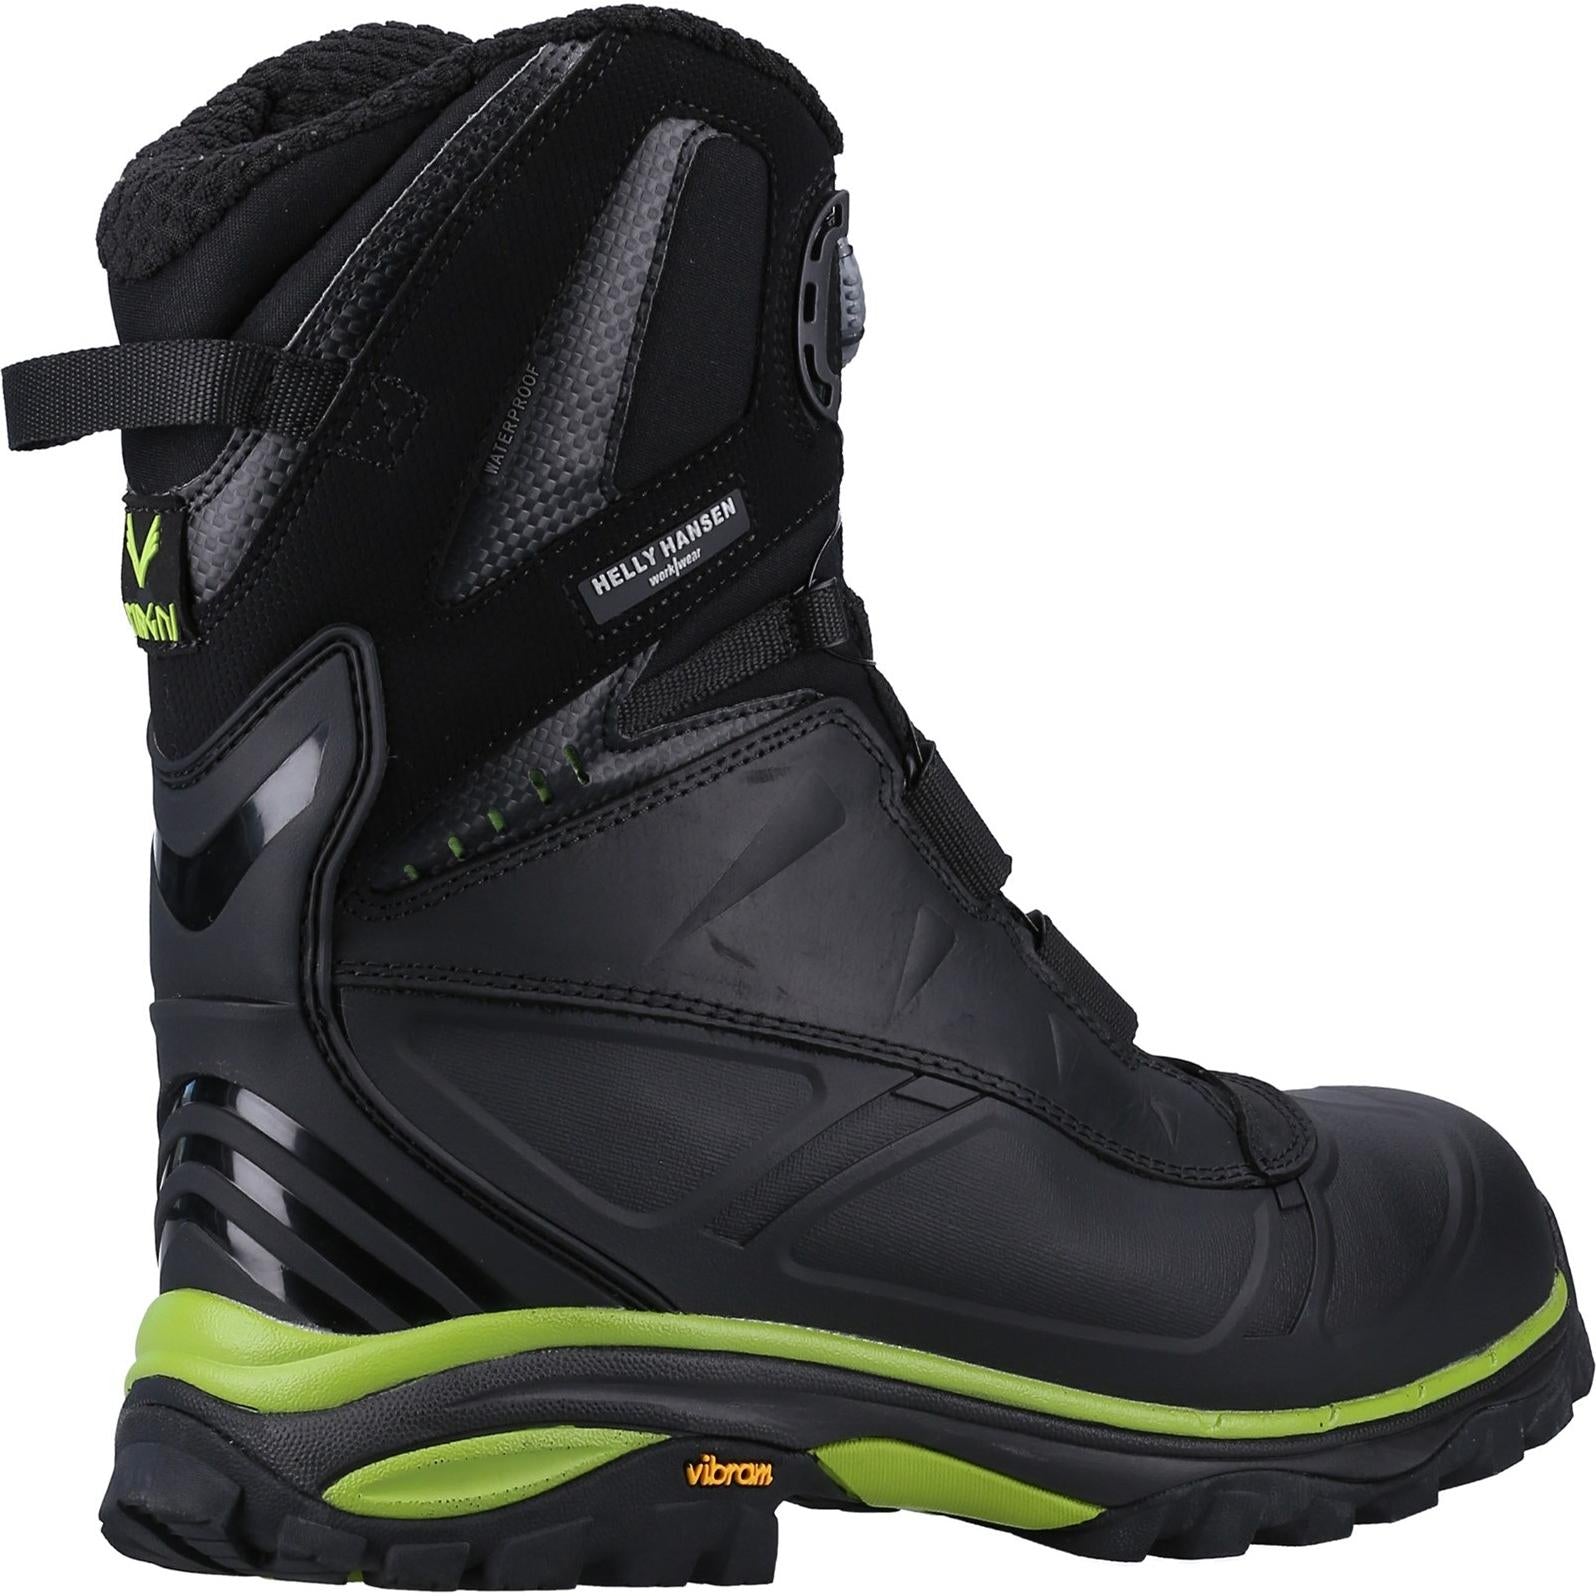 Helly Hansen Workwear Magni Boa Safety Winterboot Boots